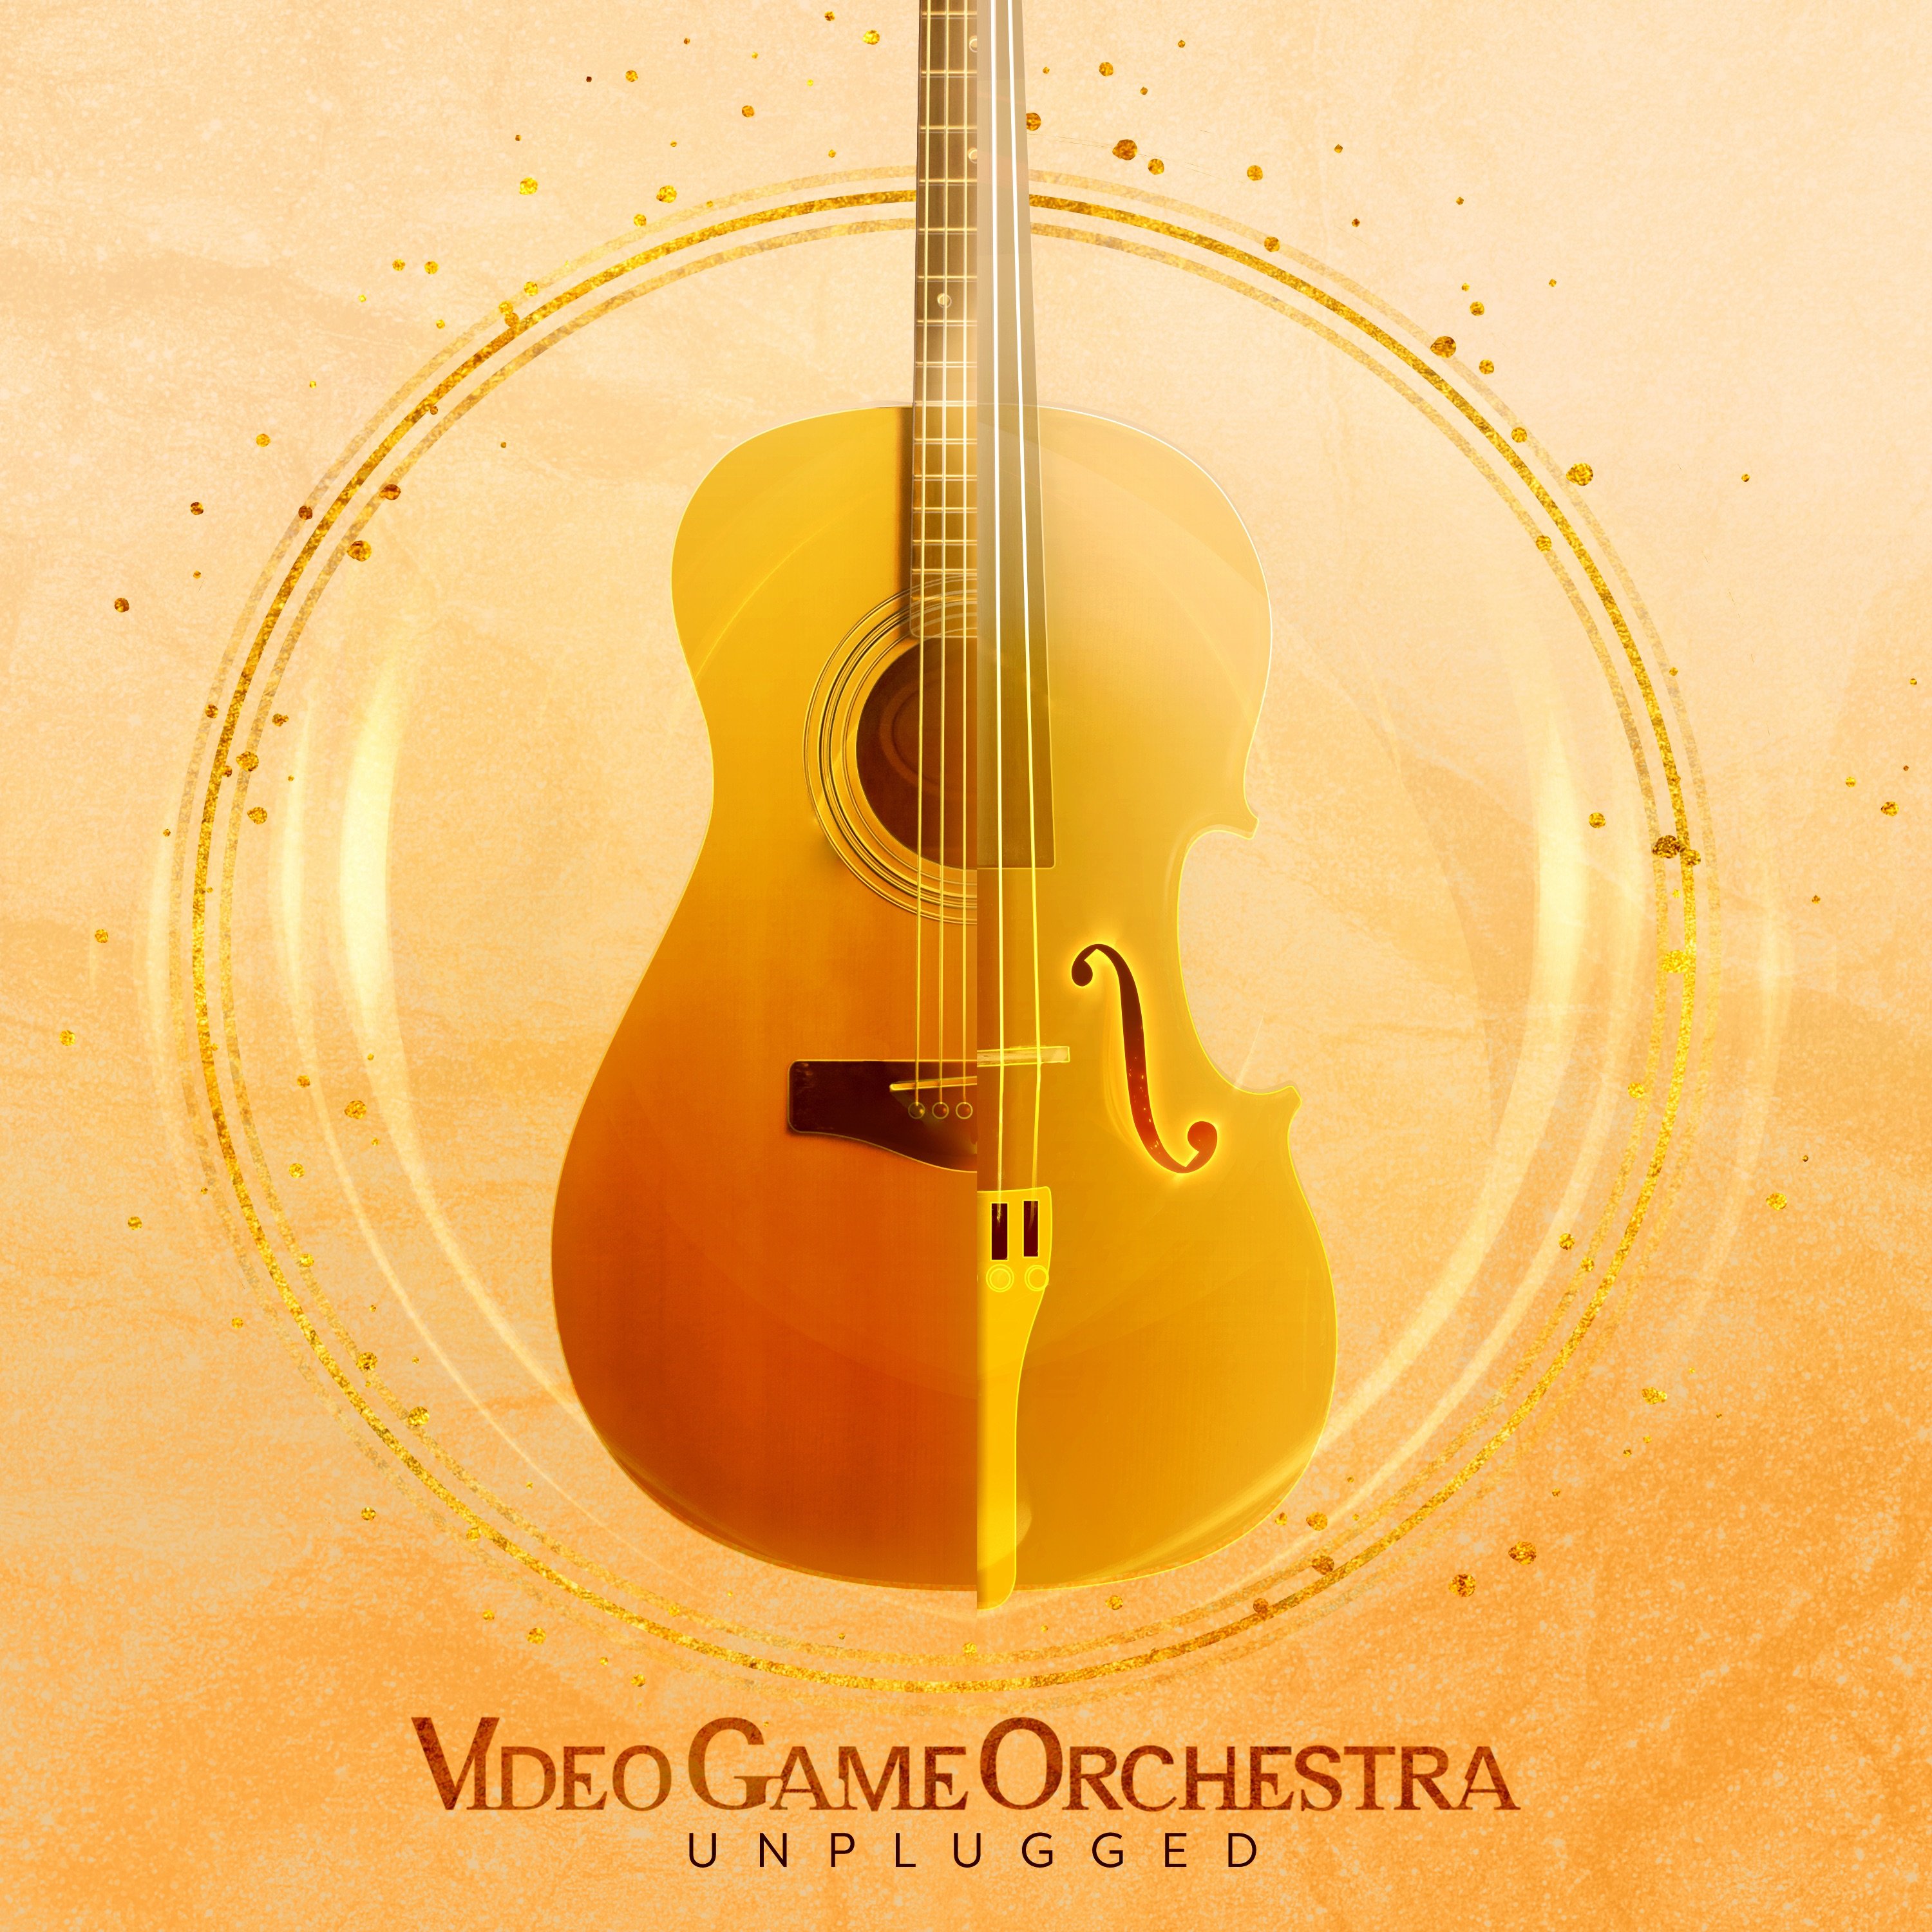 Orchestra games